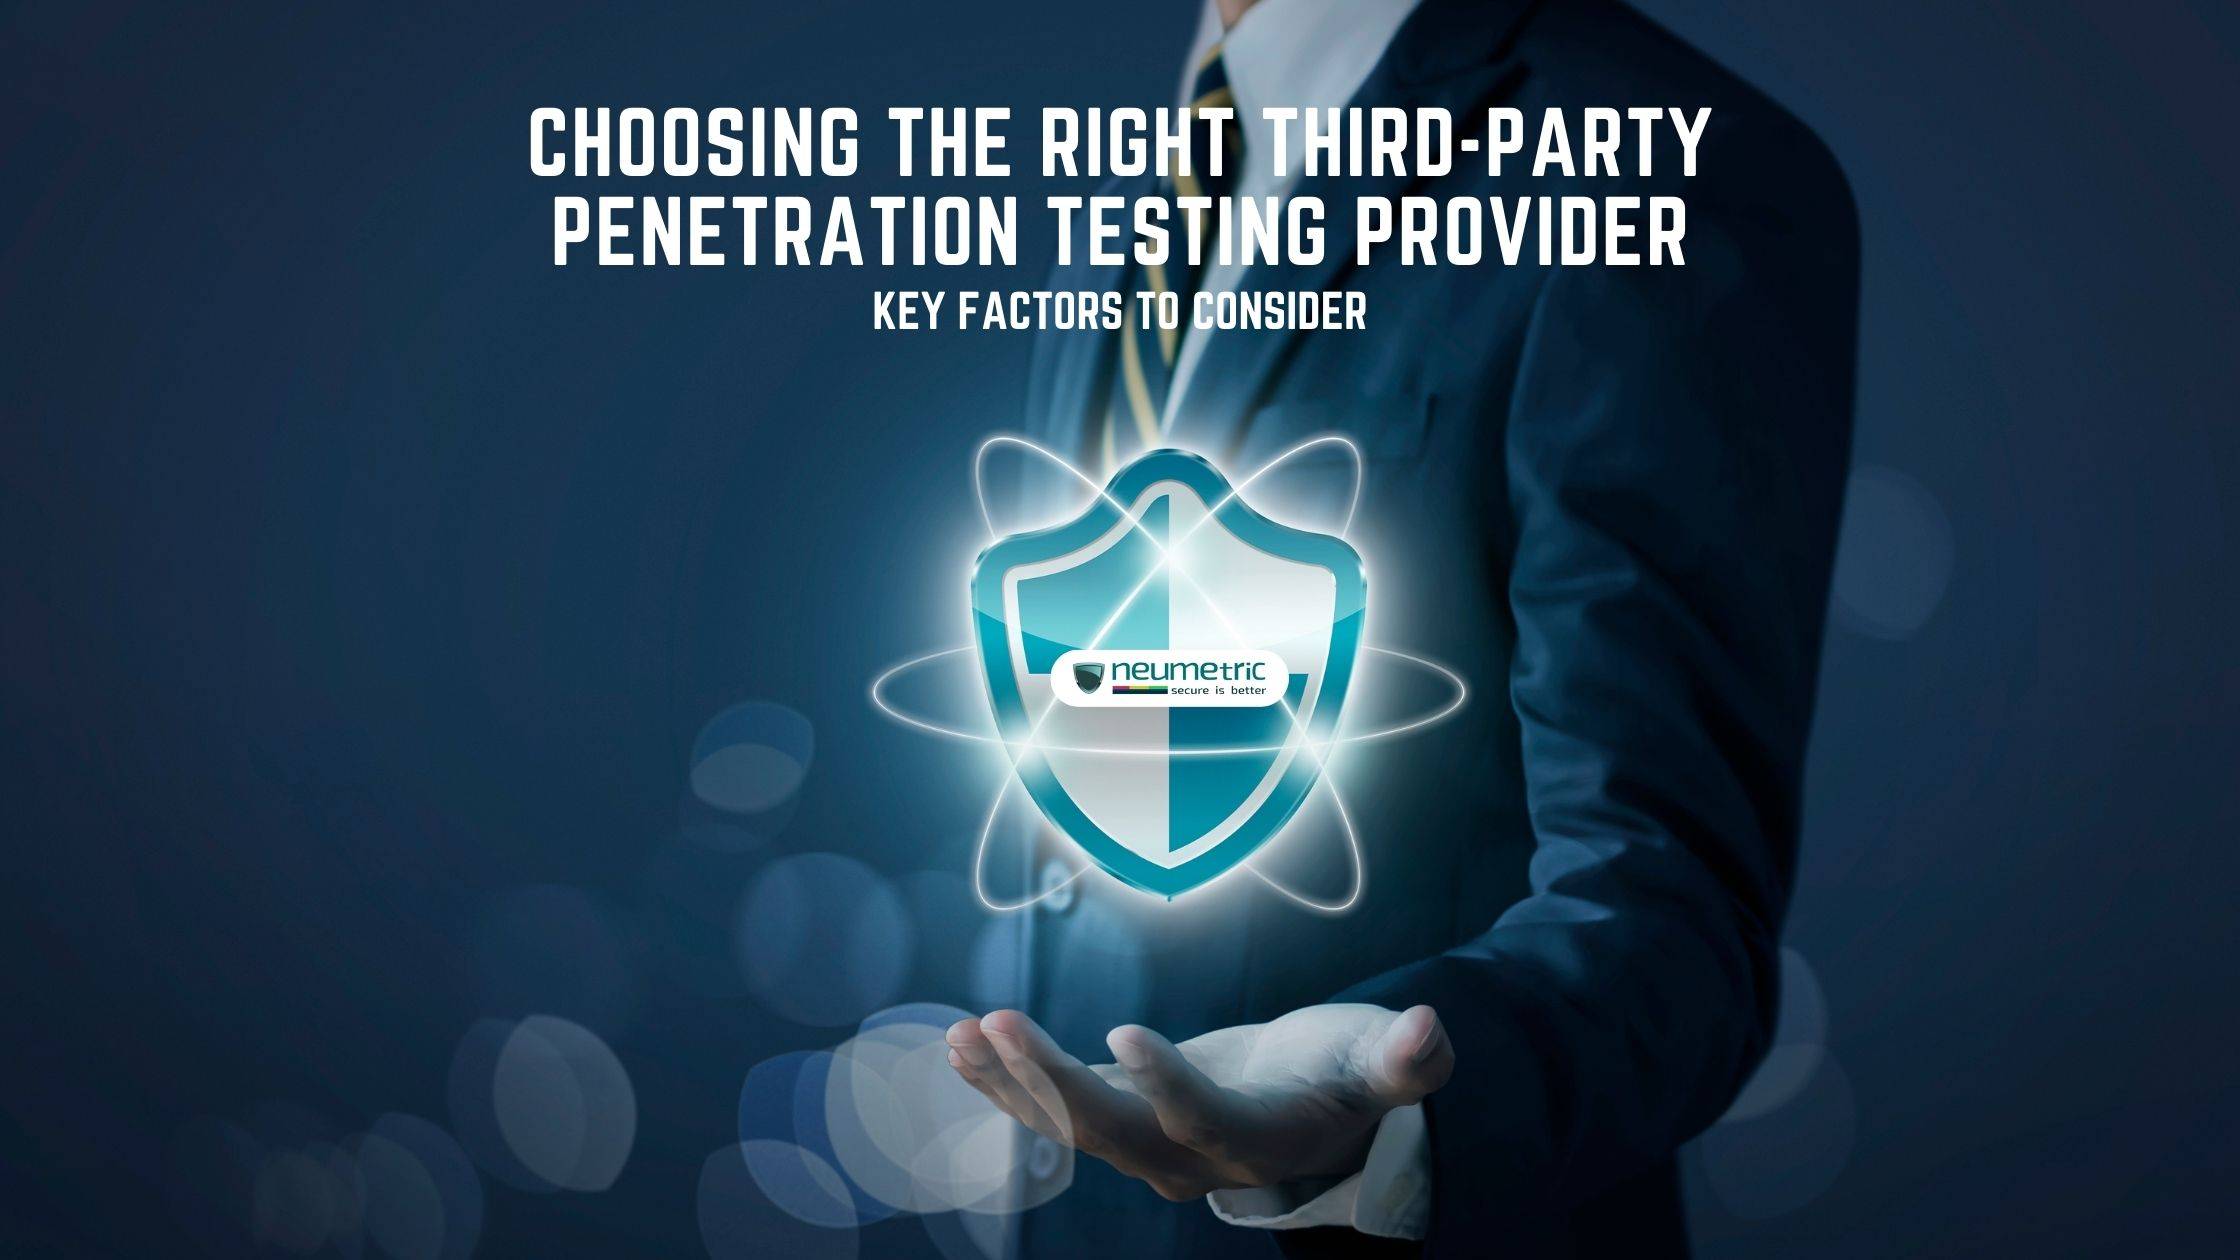 Choosing the Right Third Party Penetration Testing Provider: Key Factors to Consider